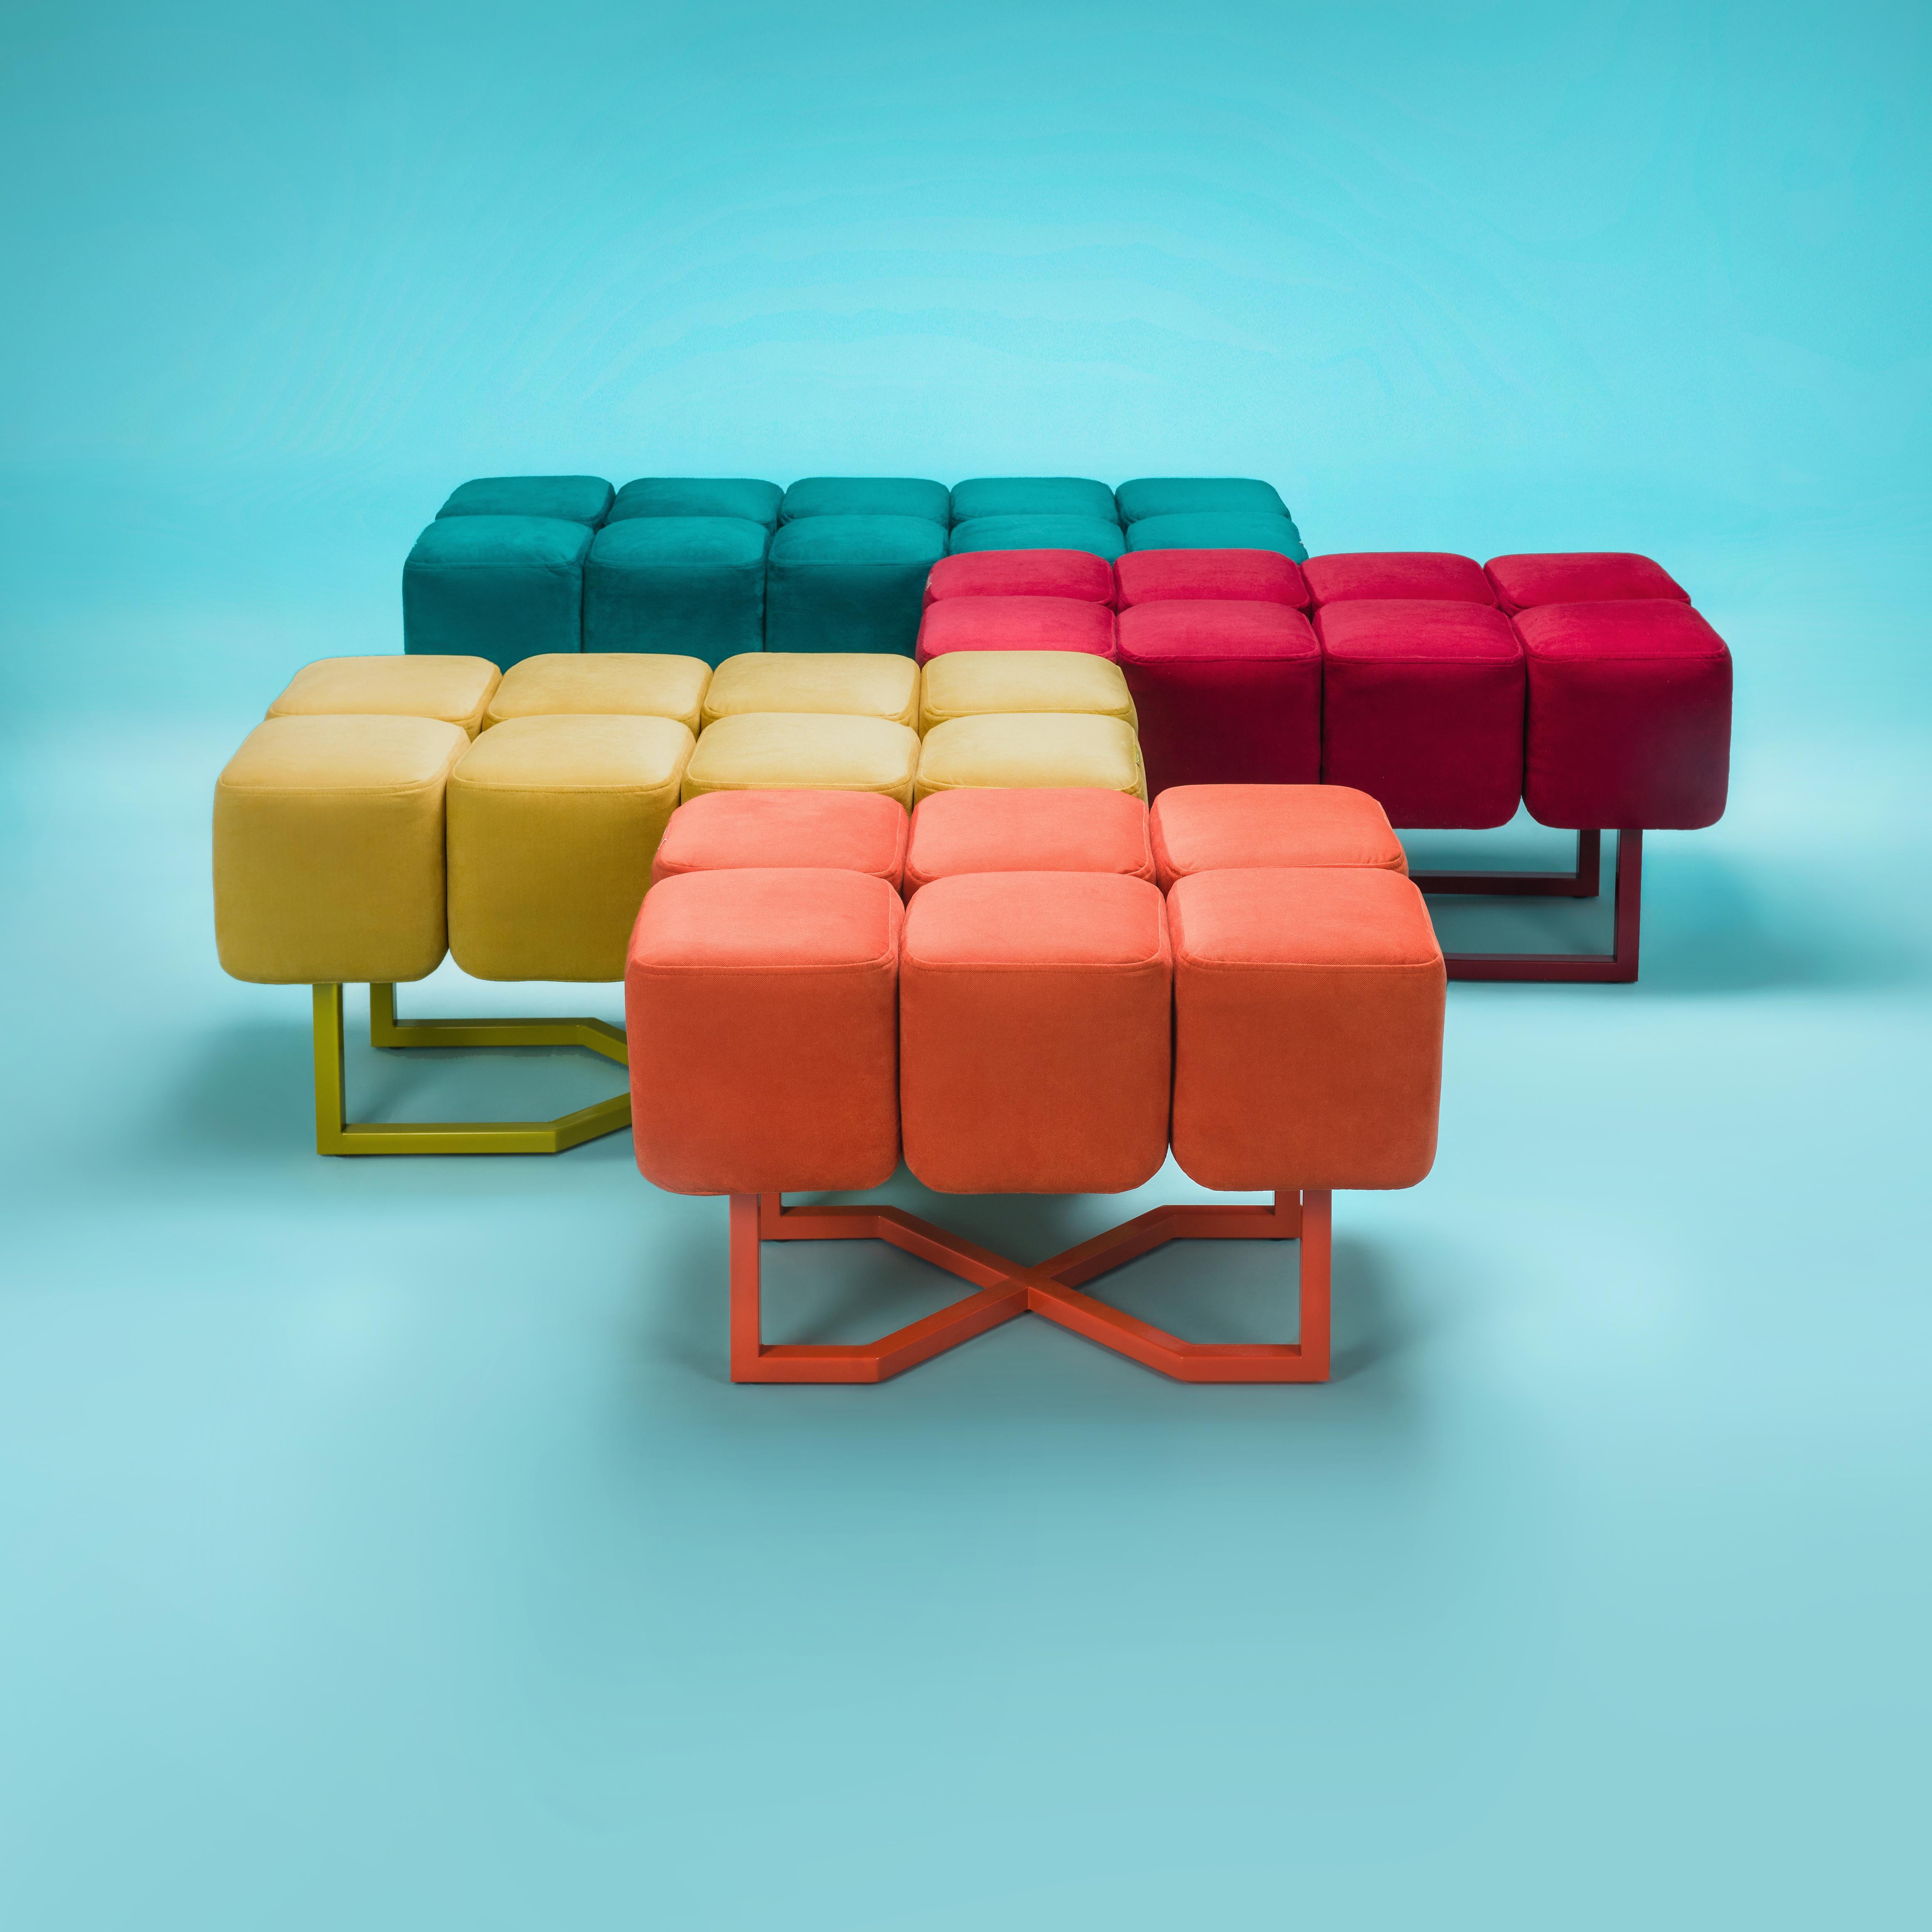 PUFFY stool M by Phormy 
Dimensions: D 44 x W 88 x H 44 cm.
Materials: Upholstery, powder coated steel base.

Different materials and sizes available. 

PUFFY is softness and lightness dressed up in ten intriguing modules. Its usage is very